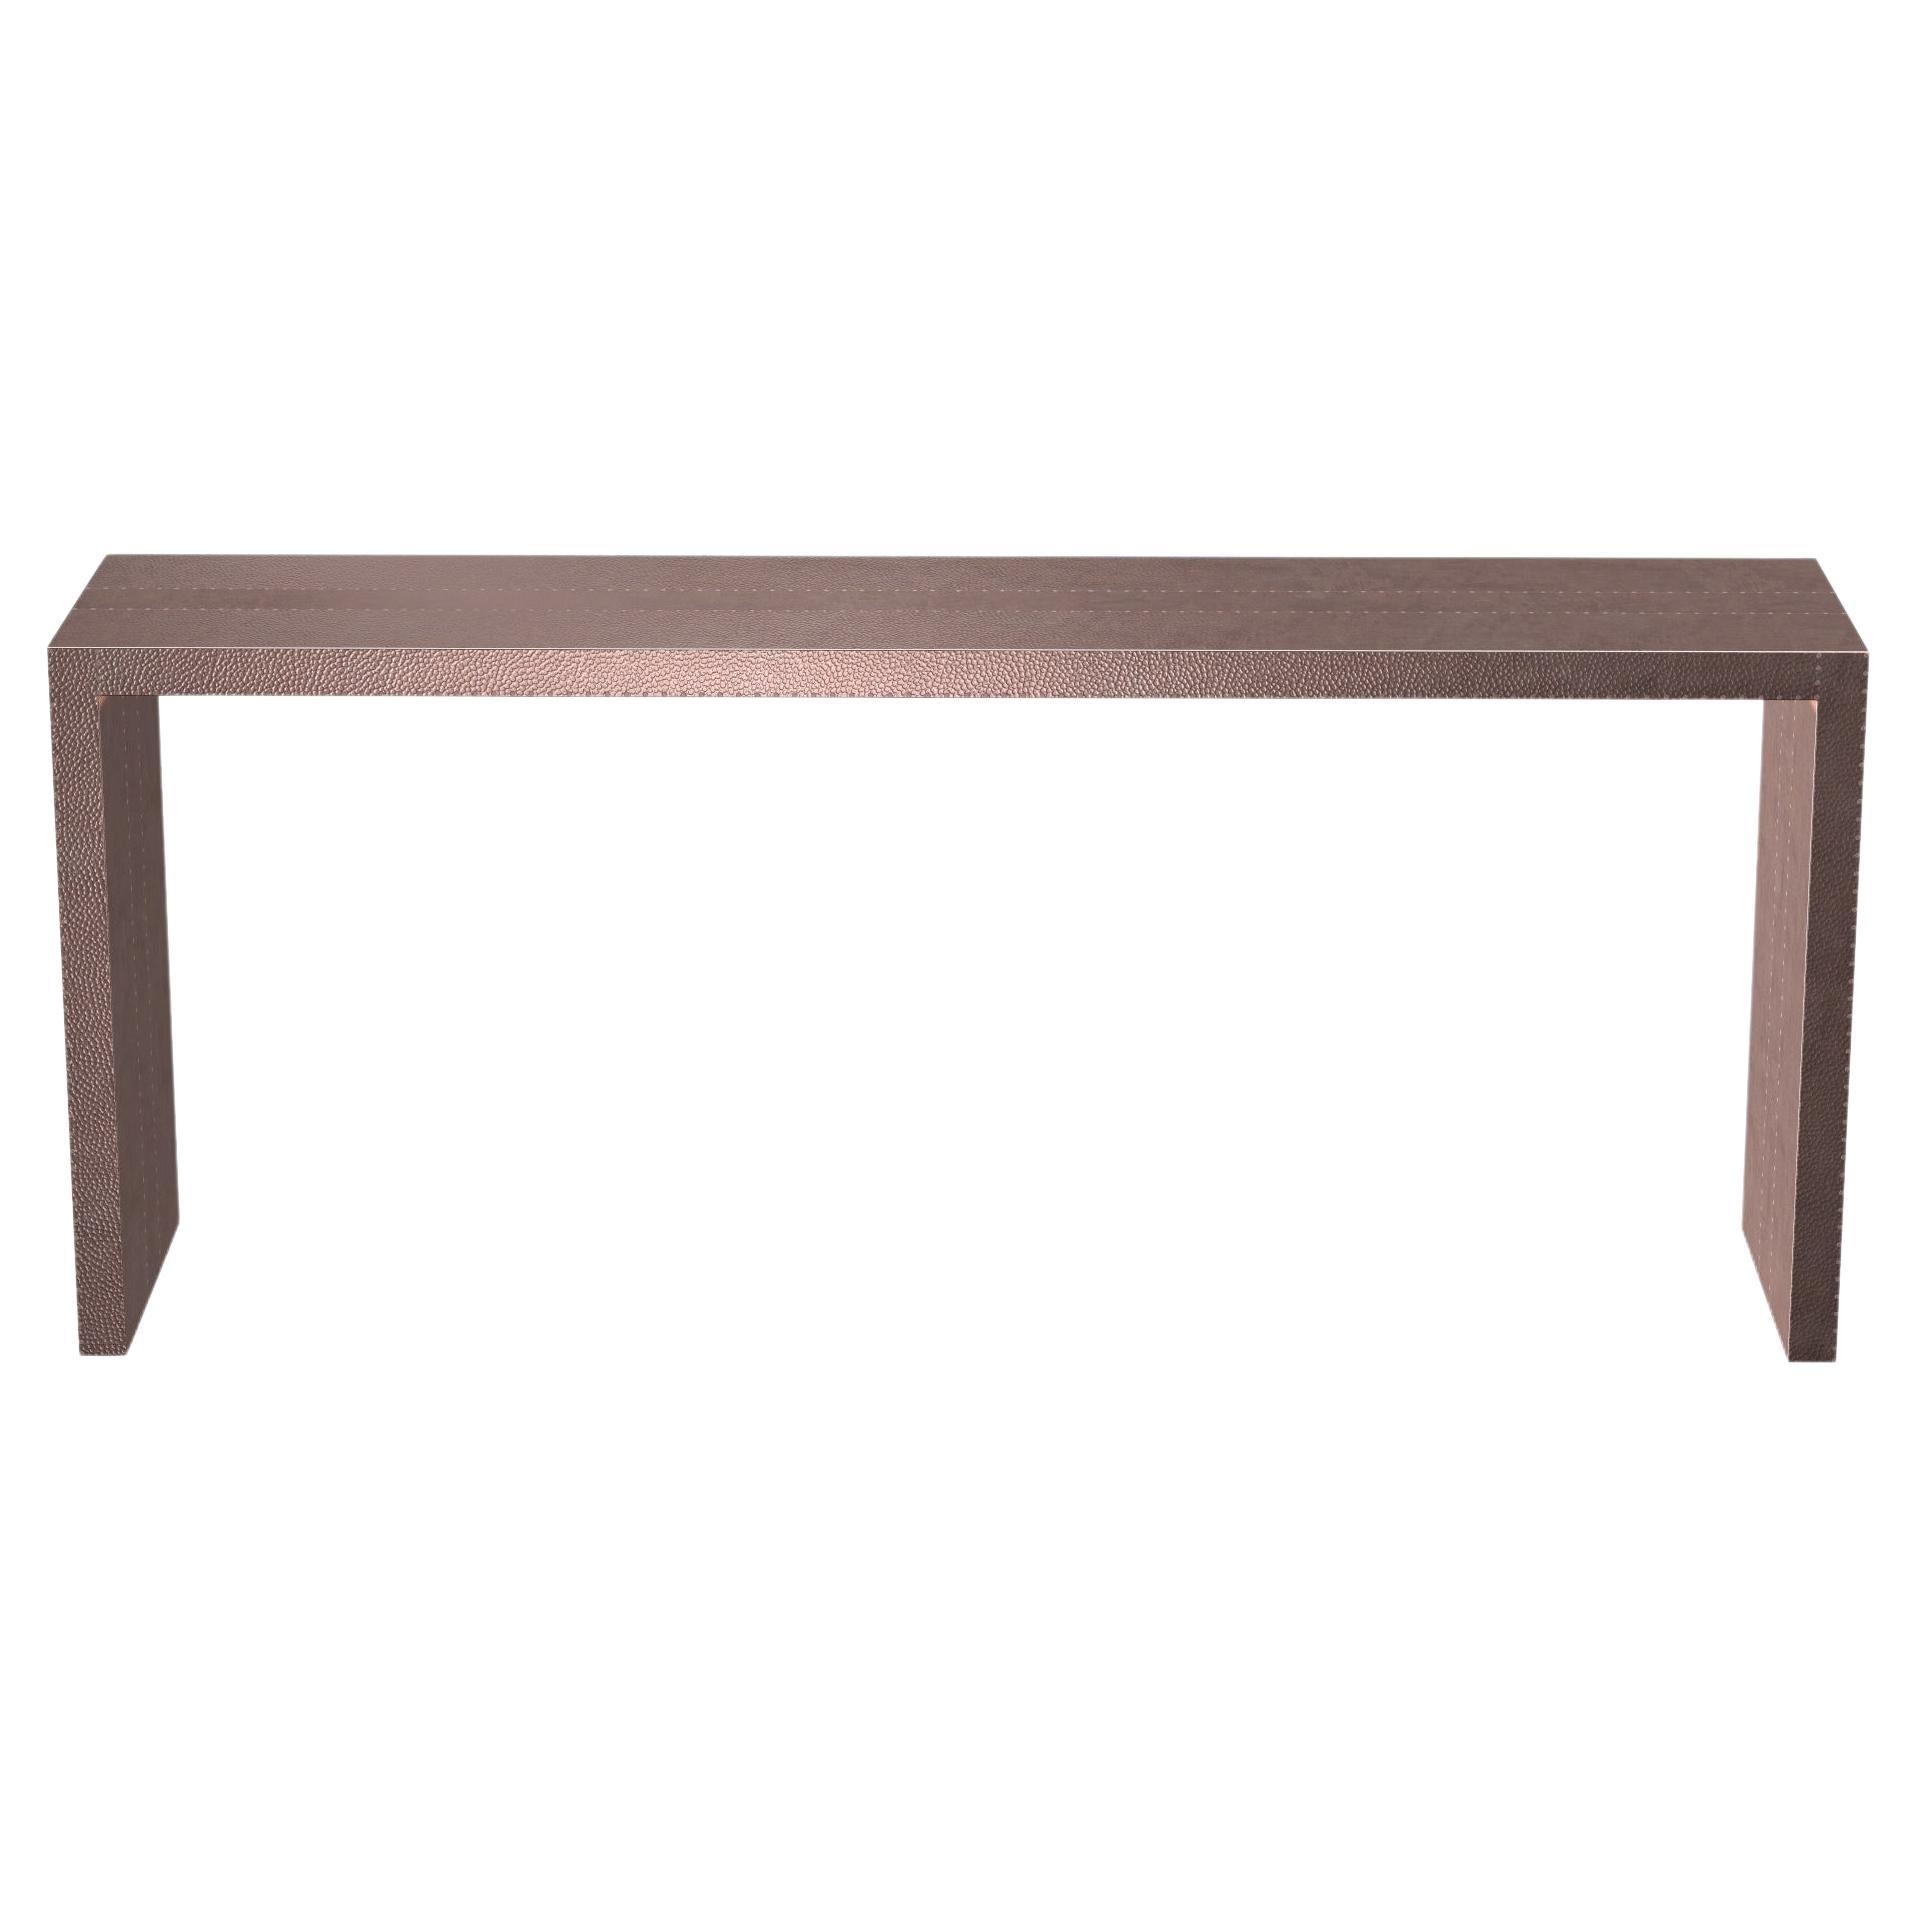 Art Deco Desks and Writing Console Tables Mid.Hammered in Copper by Alison Spear